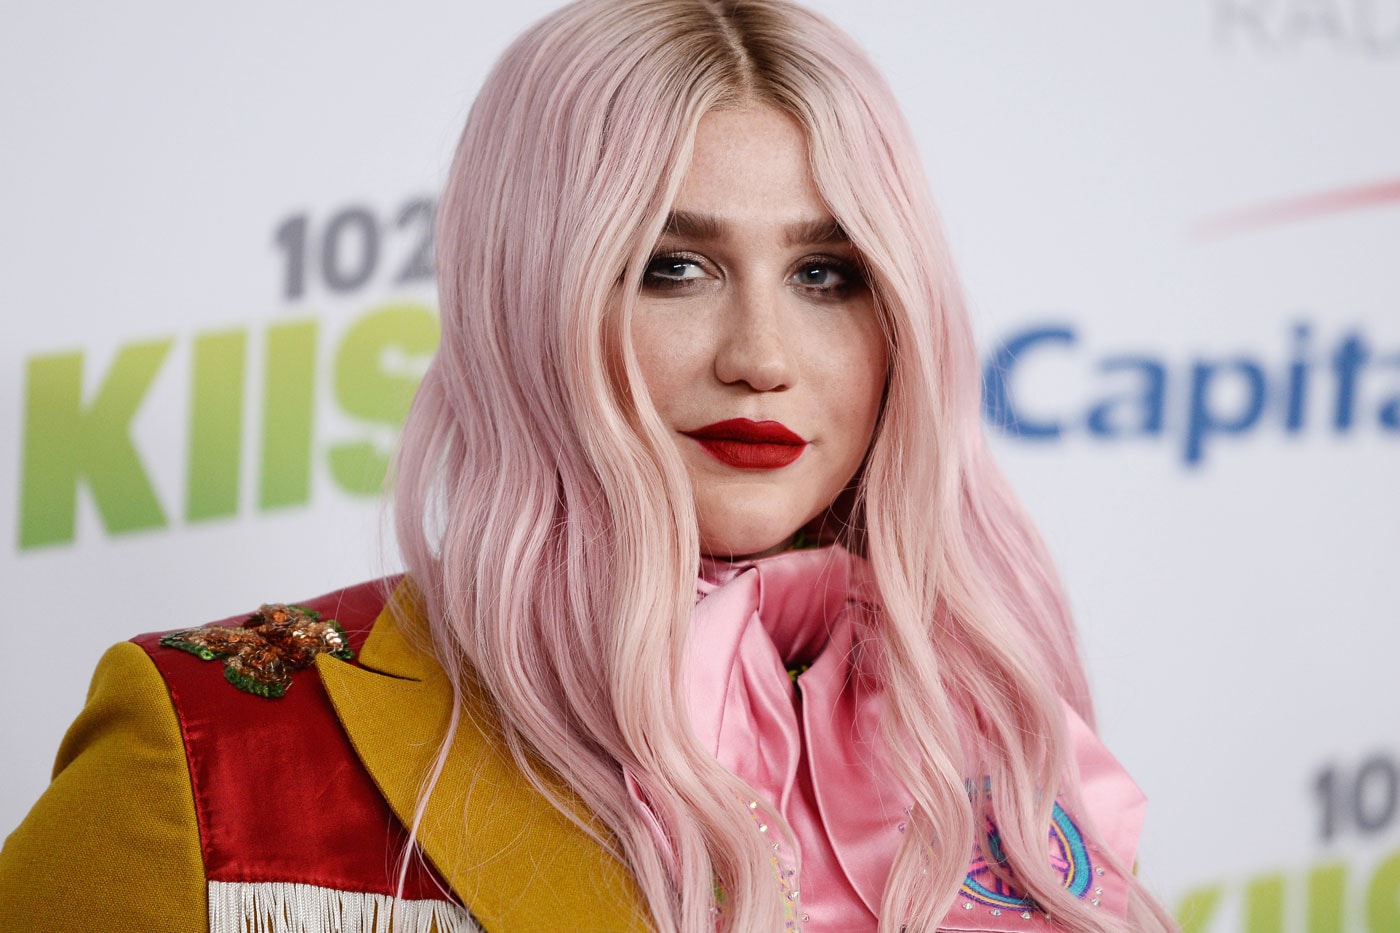 Kesha Has Dropped Her Sexual Assault Case Against Dr. Luke